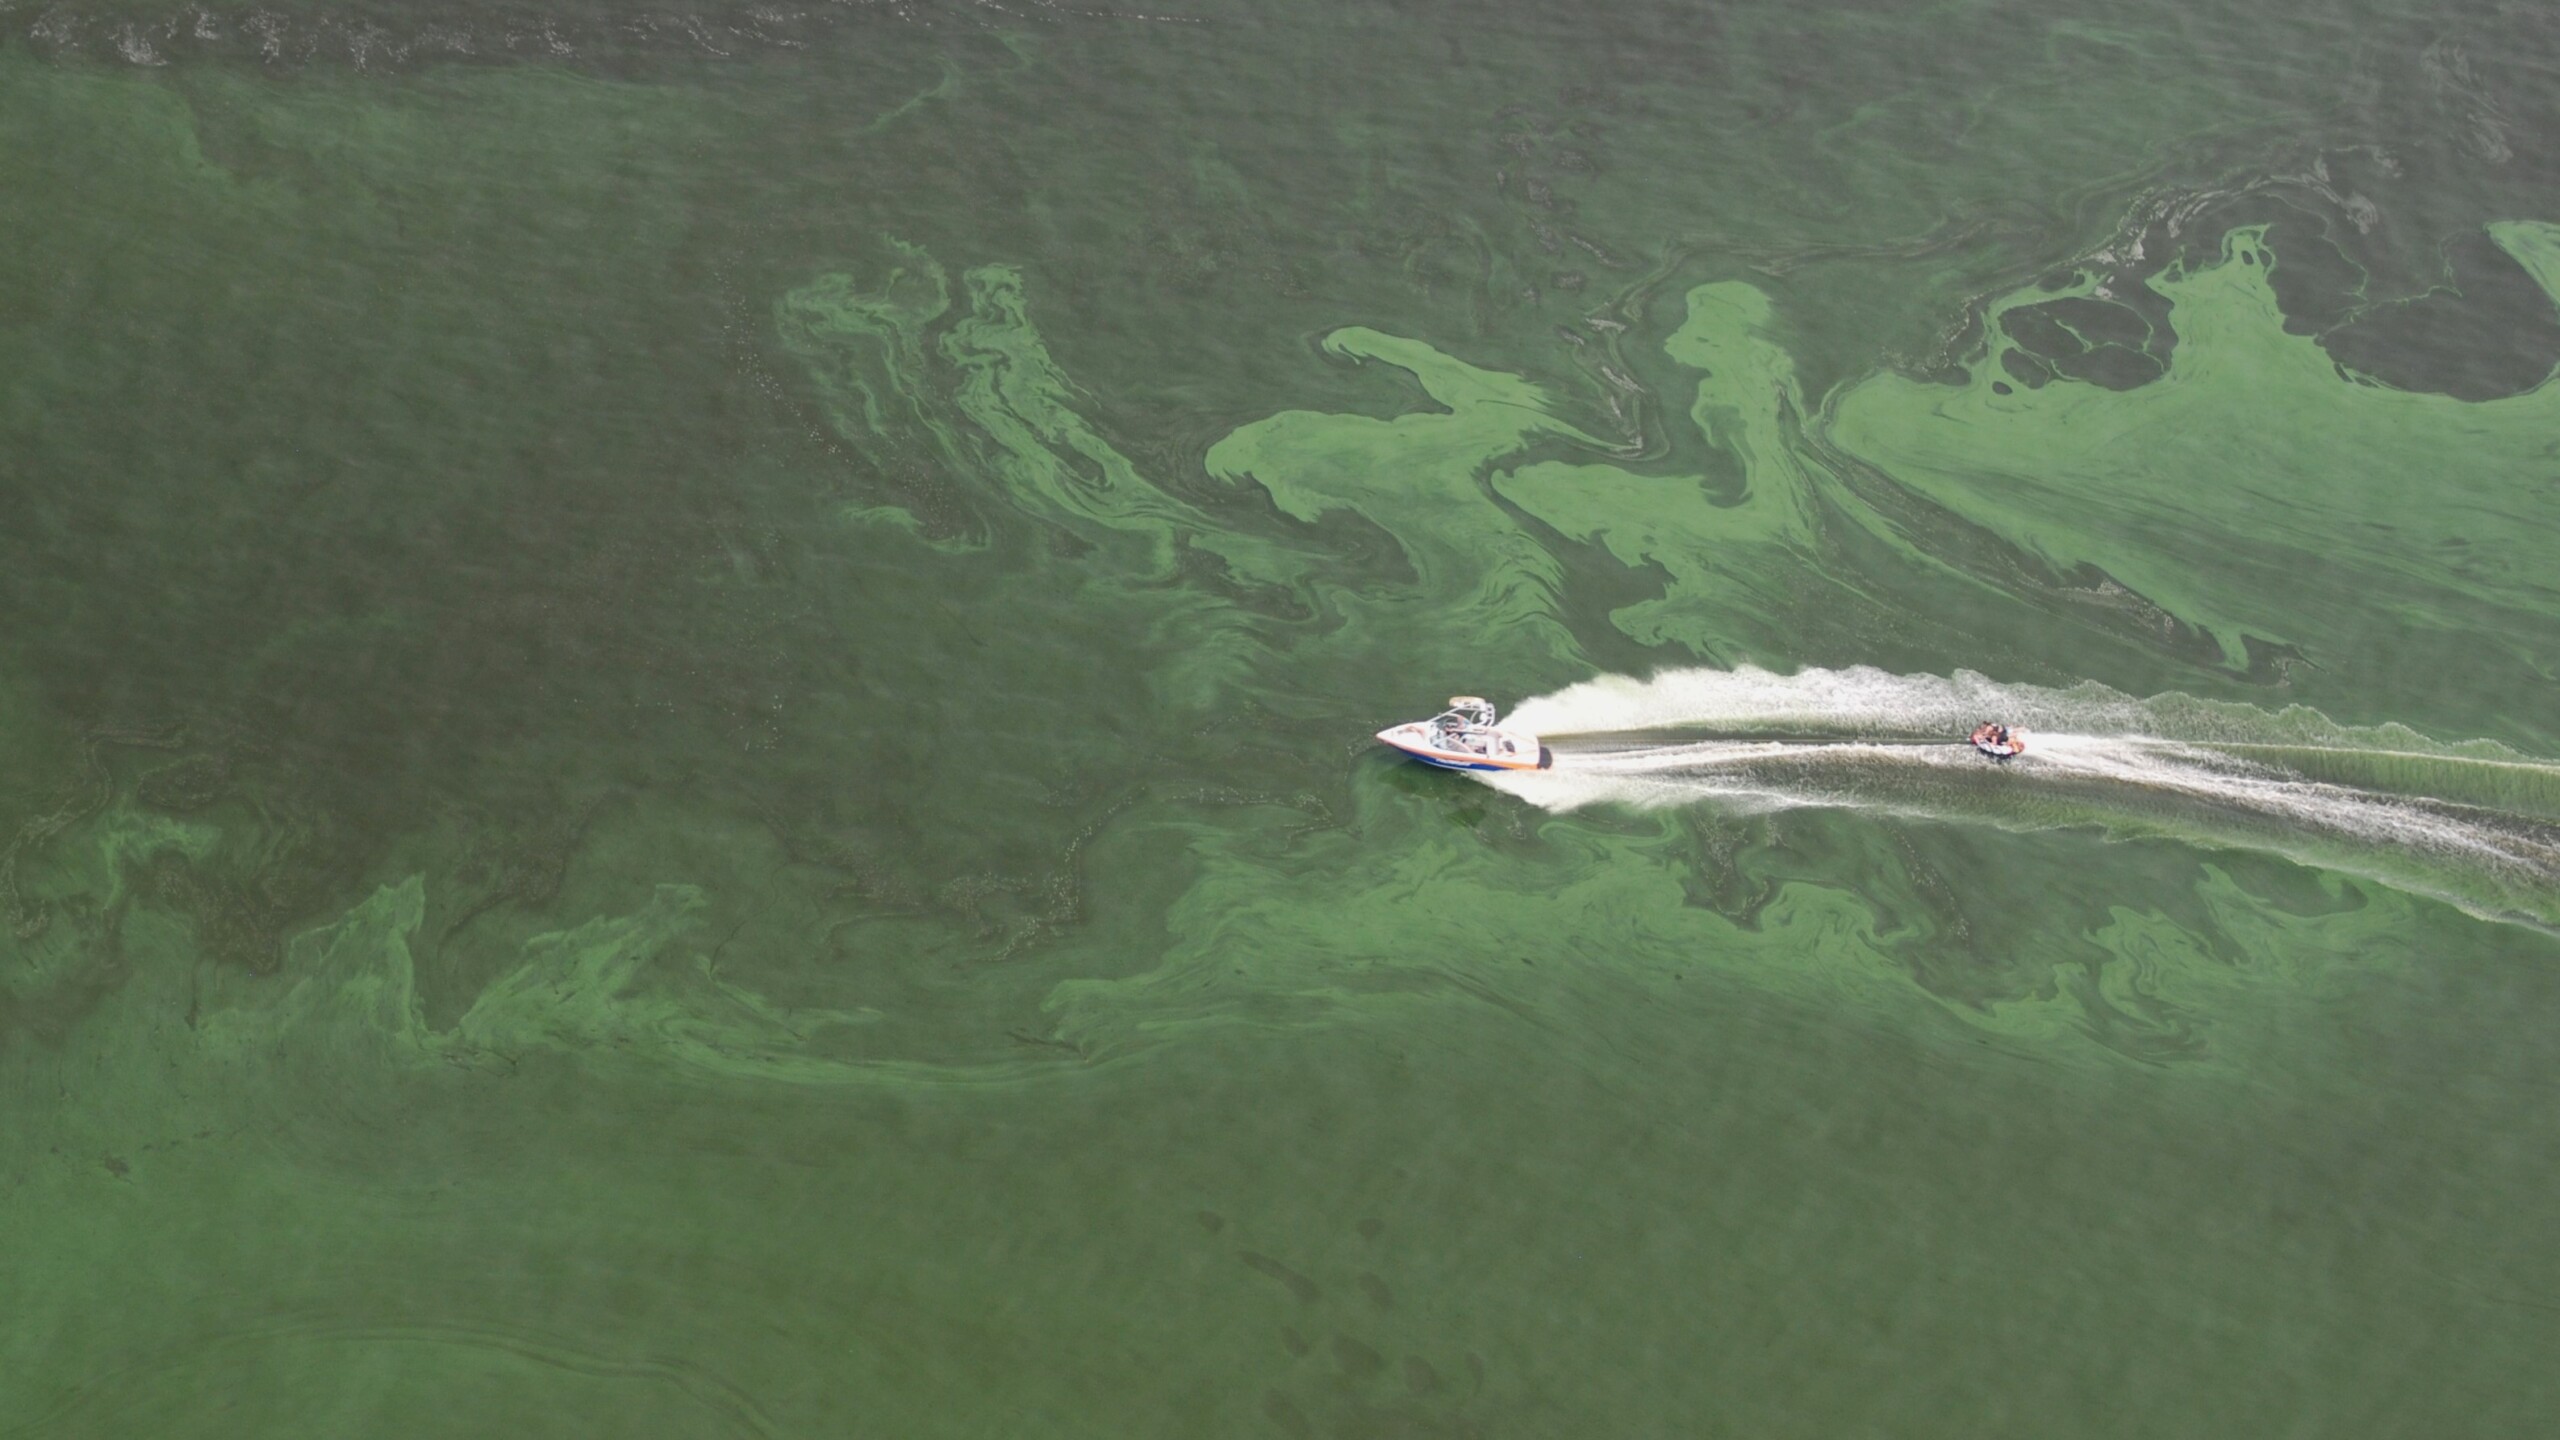 Featured image for “After Ian and Nicole, experts warn of health risks from blue-green algae”